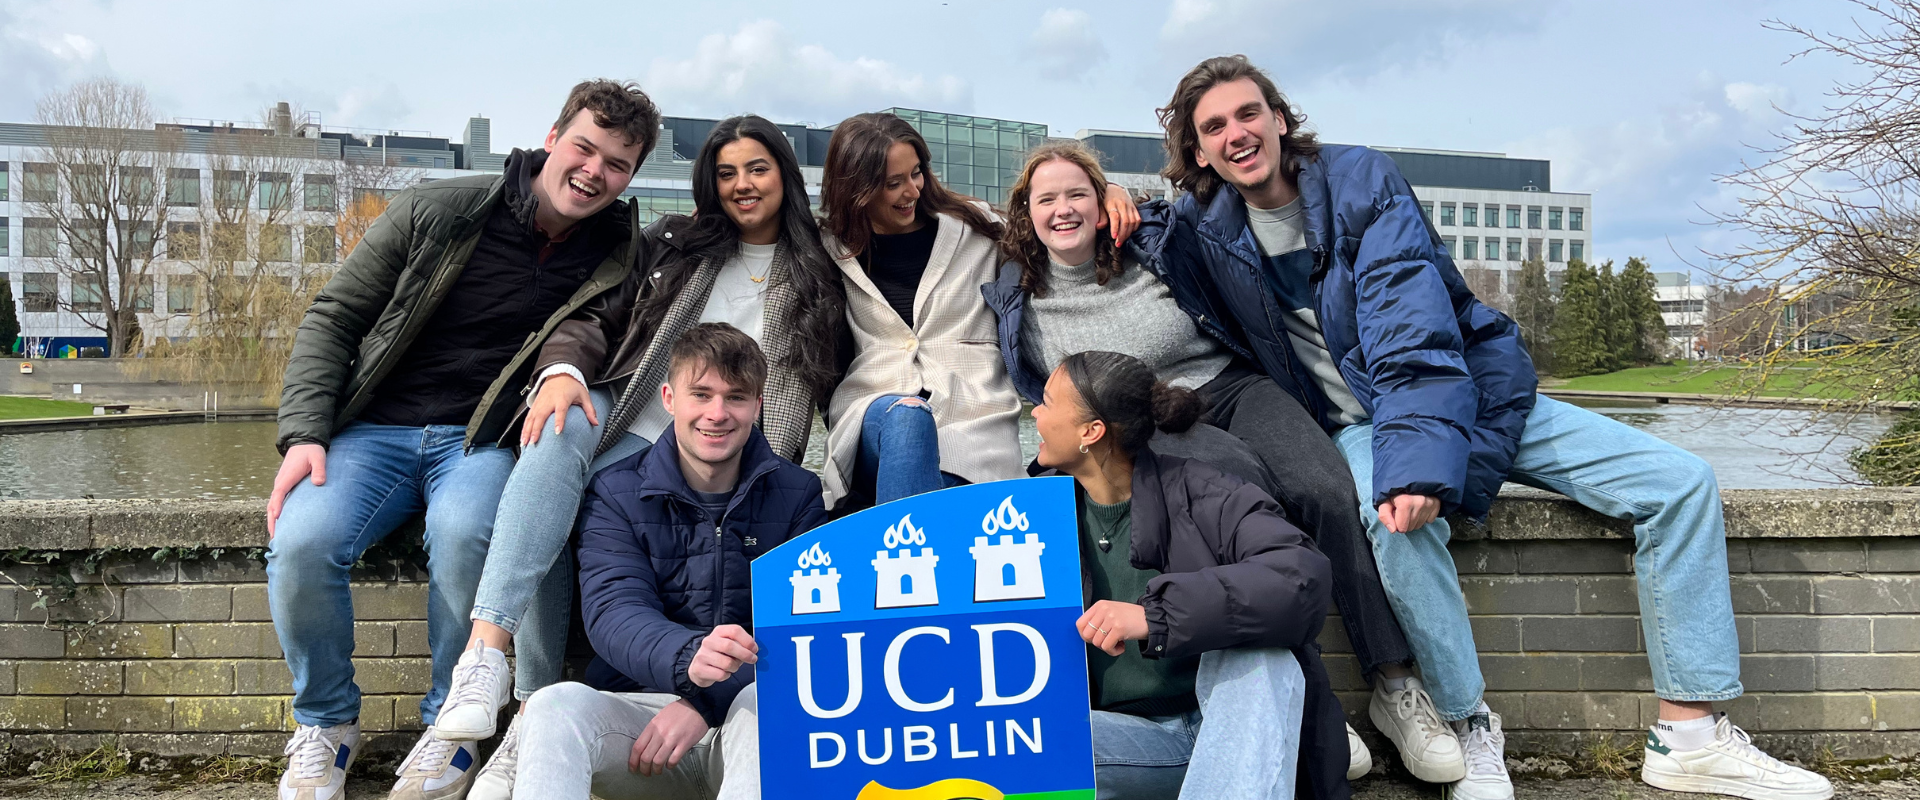 Seven students posing for a photo in front of the Science Building with a UCD logo prop.